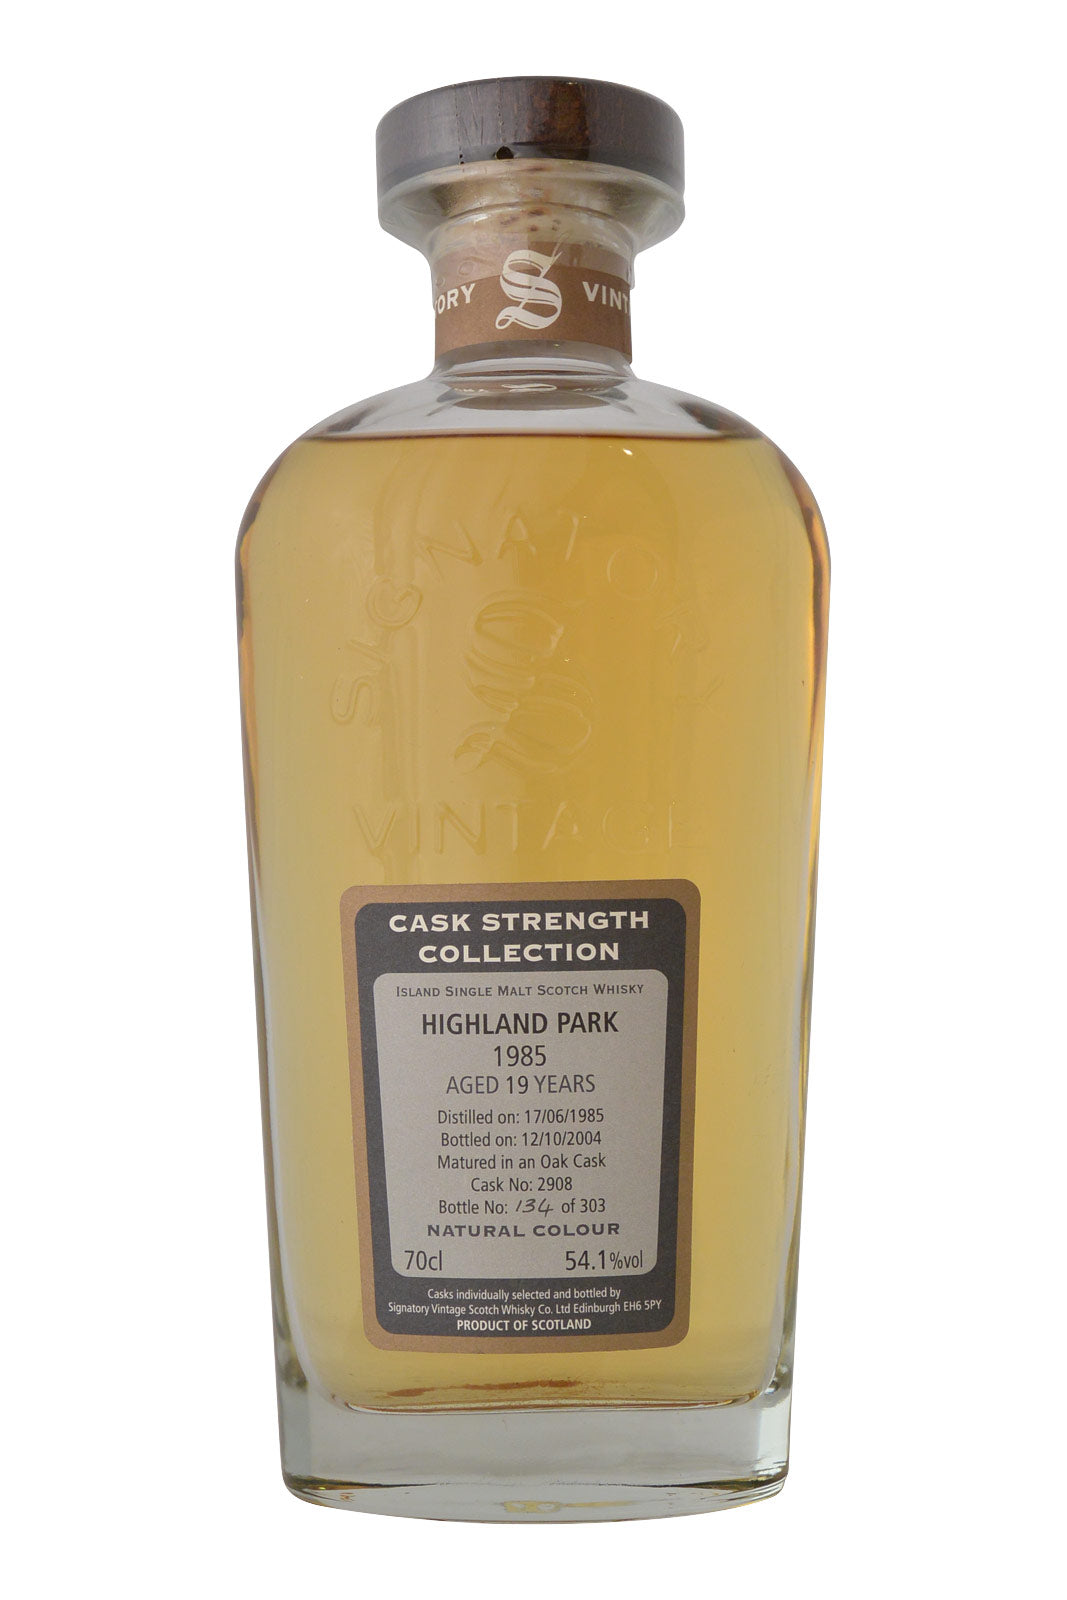 Highland Park 1985 Aged 19 Year Old Cask Strength Collection Signatory Vintage